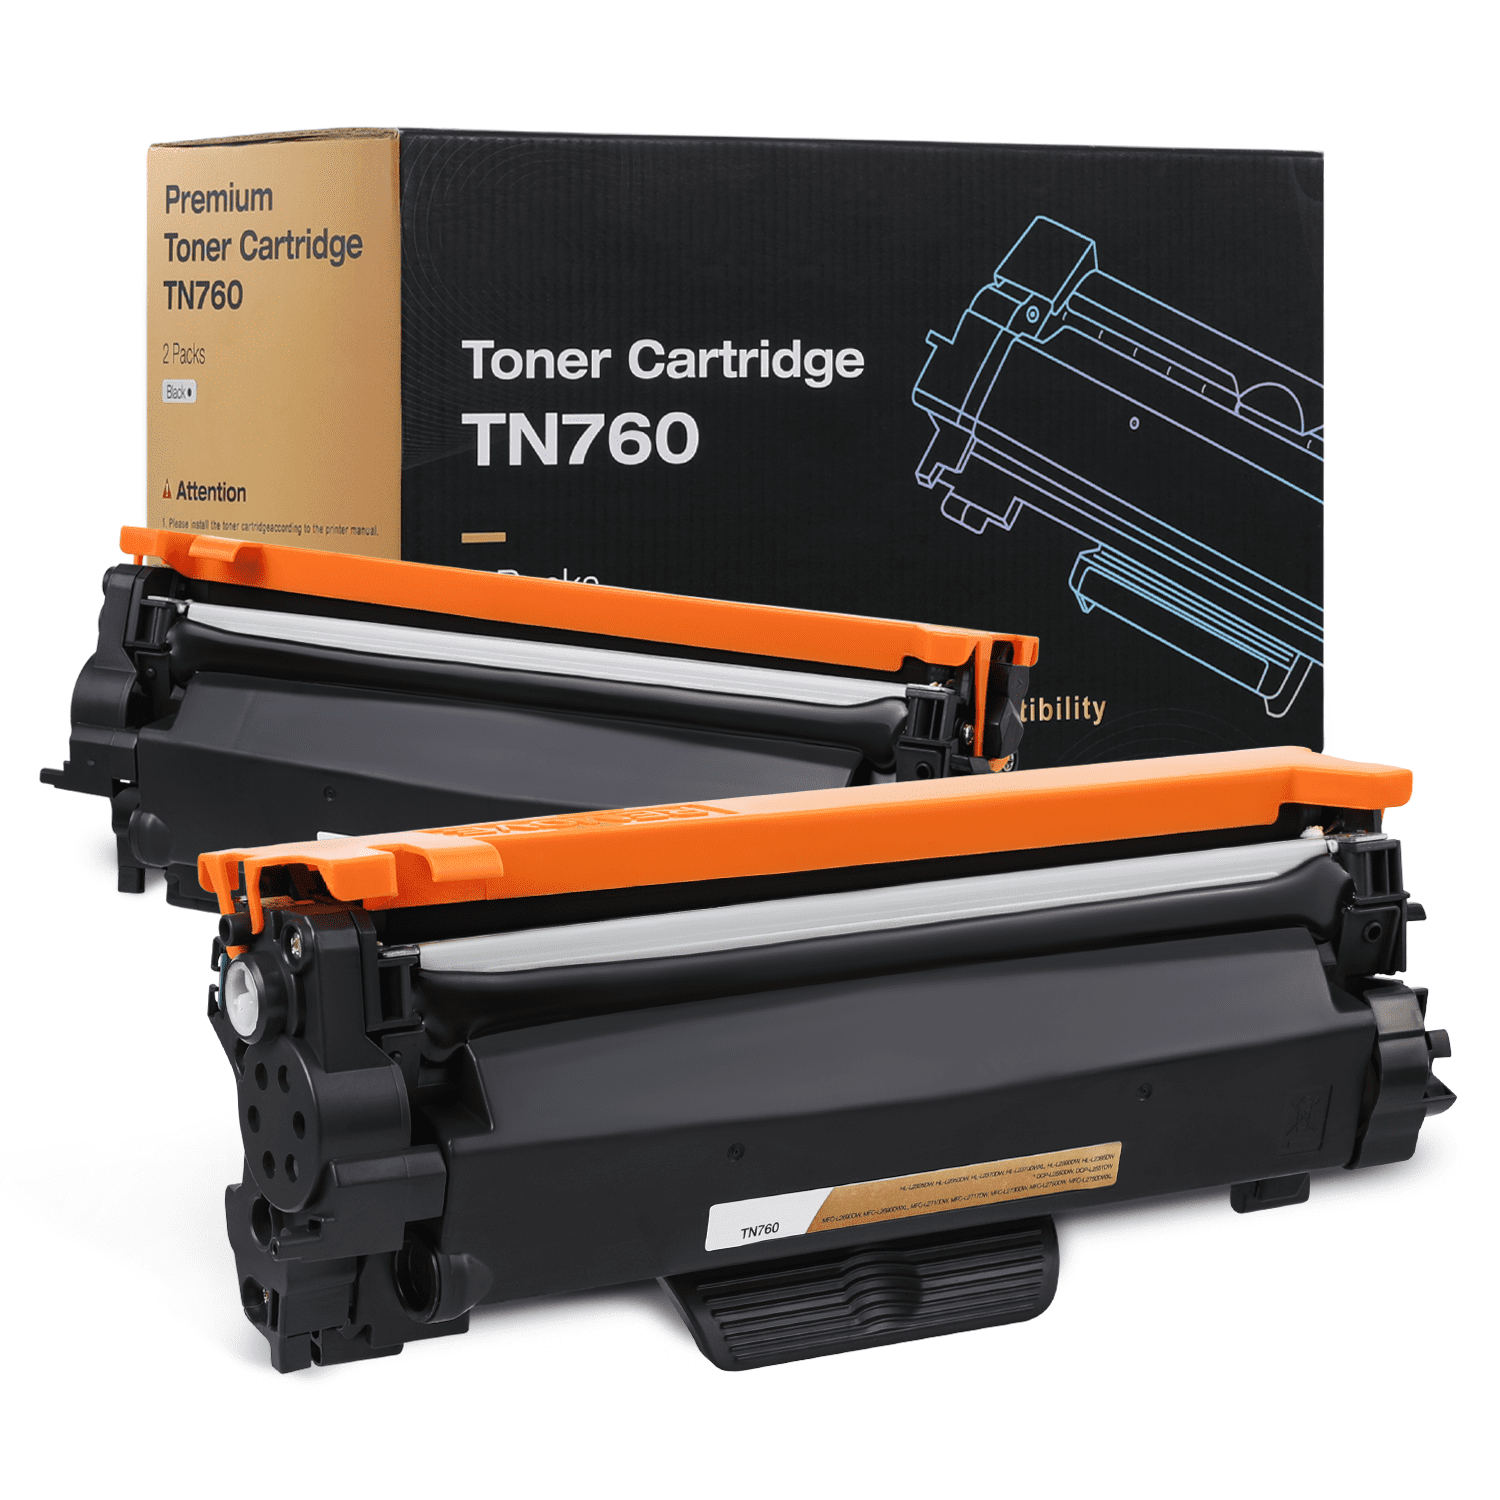 2-Pack True Image Compatible Toner Cartridge for Brother Printer - High  Yield Black Ink, TN760 TN730 Replacement